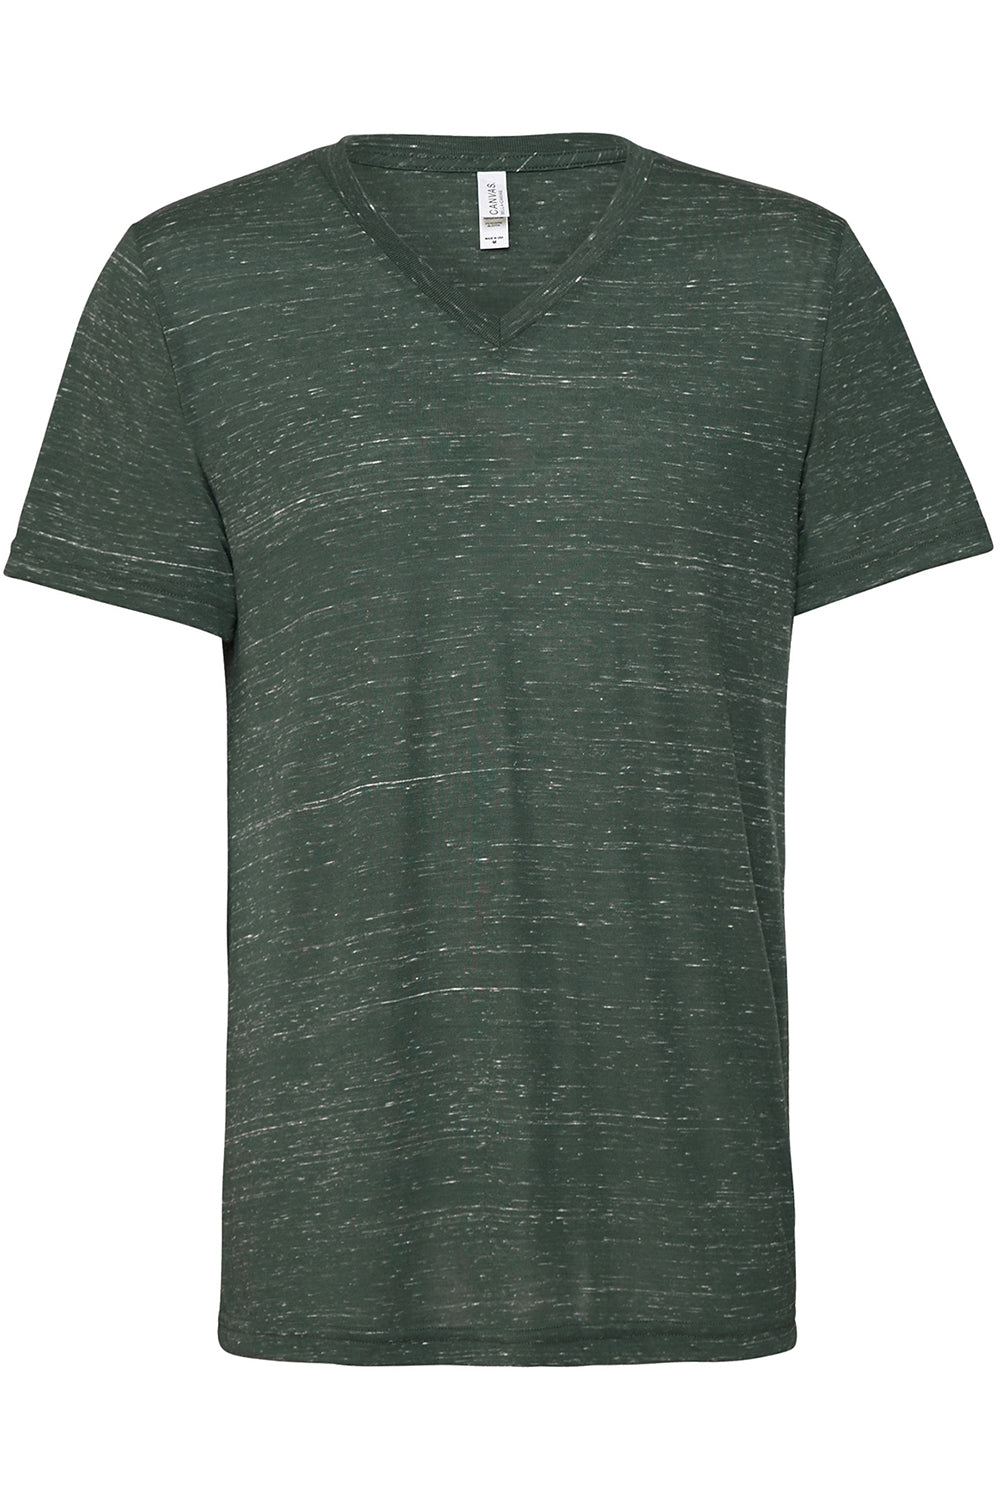 Bella + Canvas BC3005/3005/3655C Mens Jersey Short Sleeve V-Neck T-Shirt Forest Green Marble Flat Front